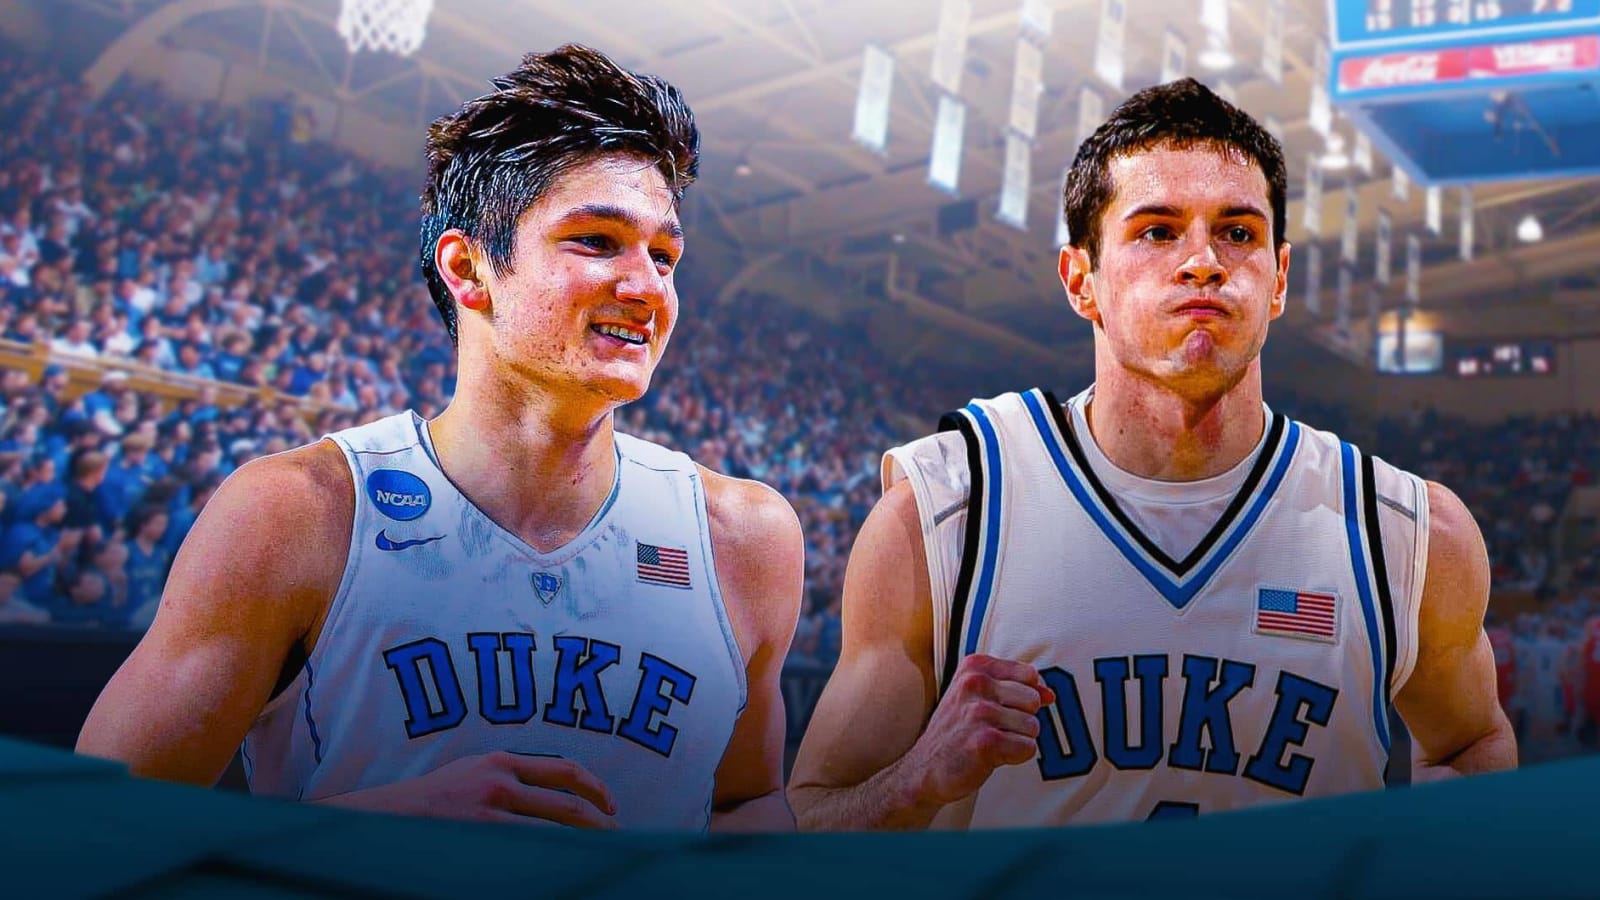 March Madness: UNC legend name drops Grayson Allen, JJ Redick as most annoying Duke players